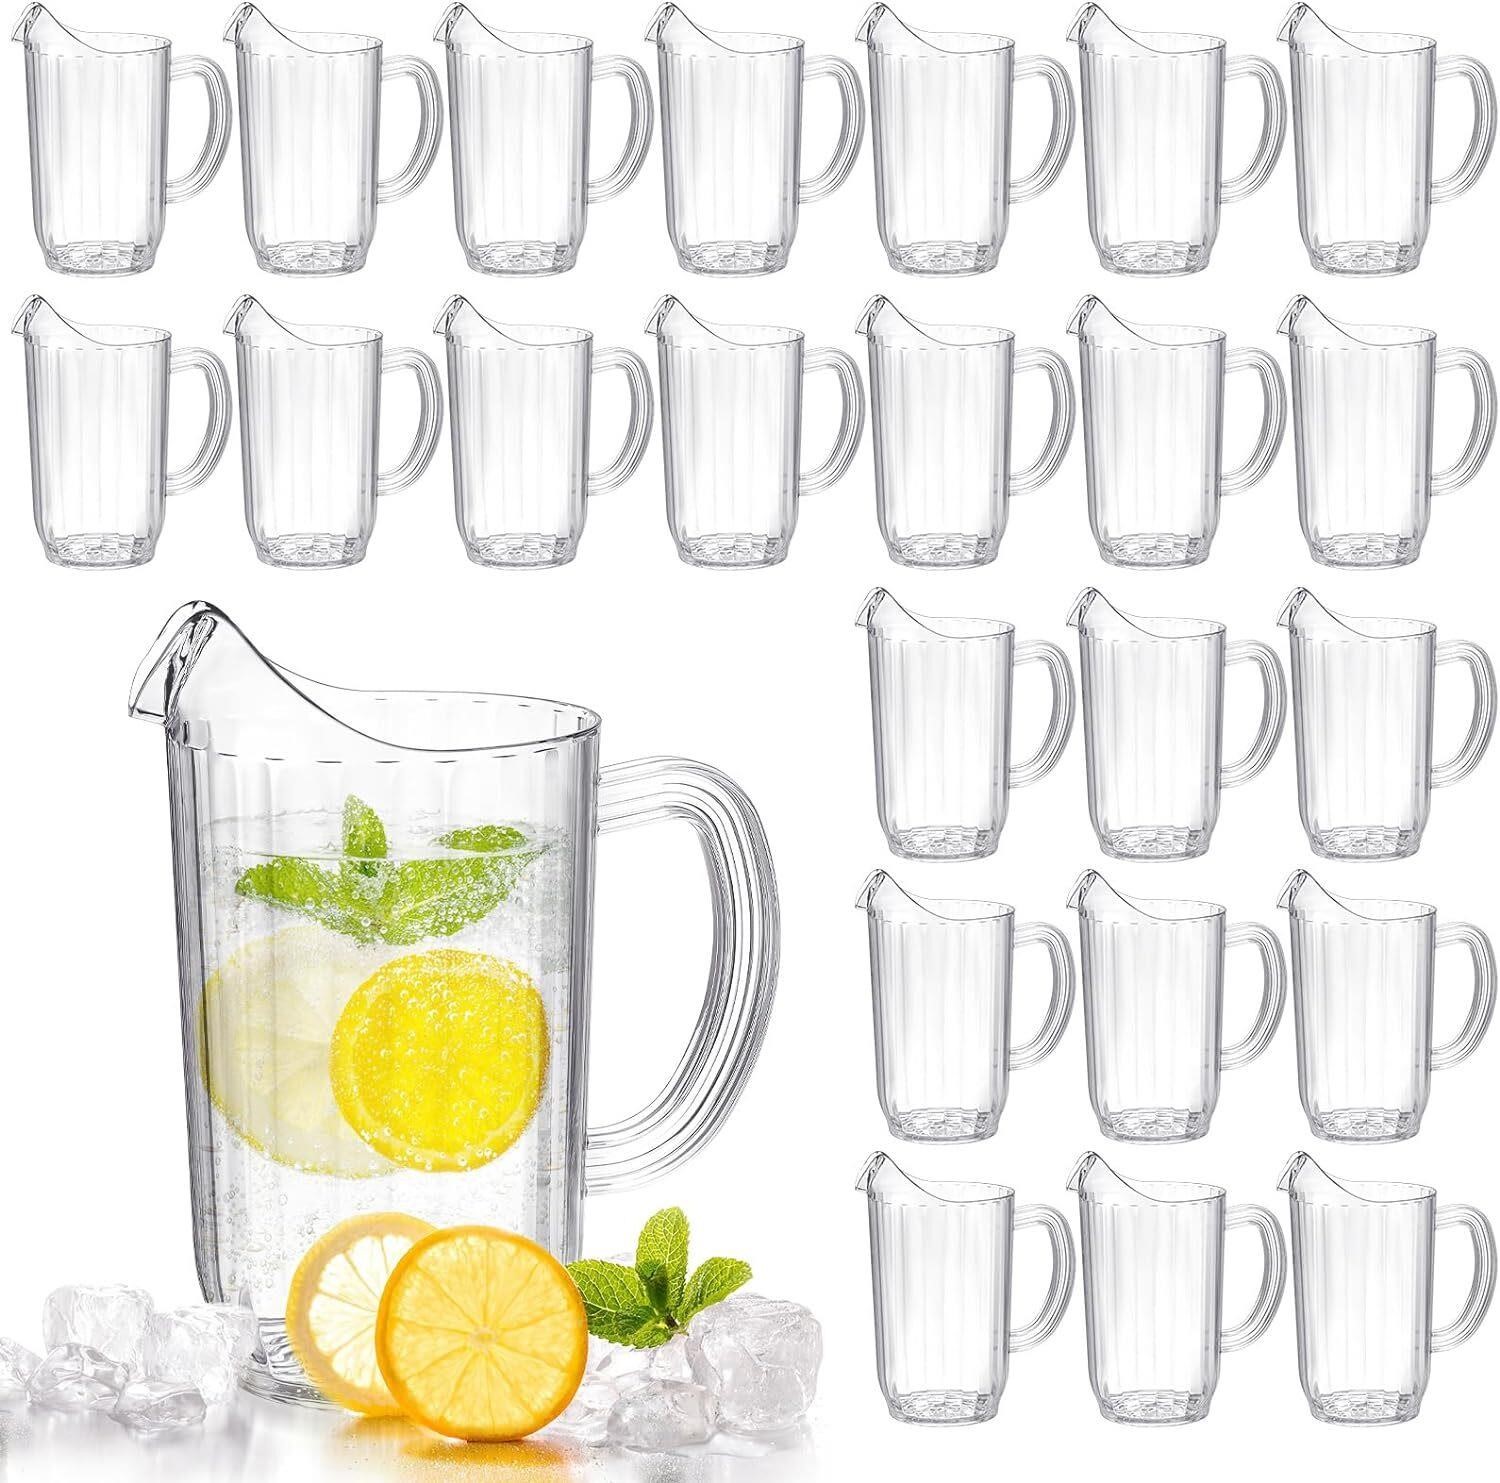 Mifoci 24 Pack 48oz Acrylic Pitcher with Spout